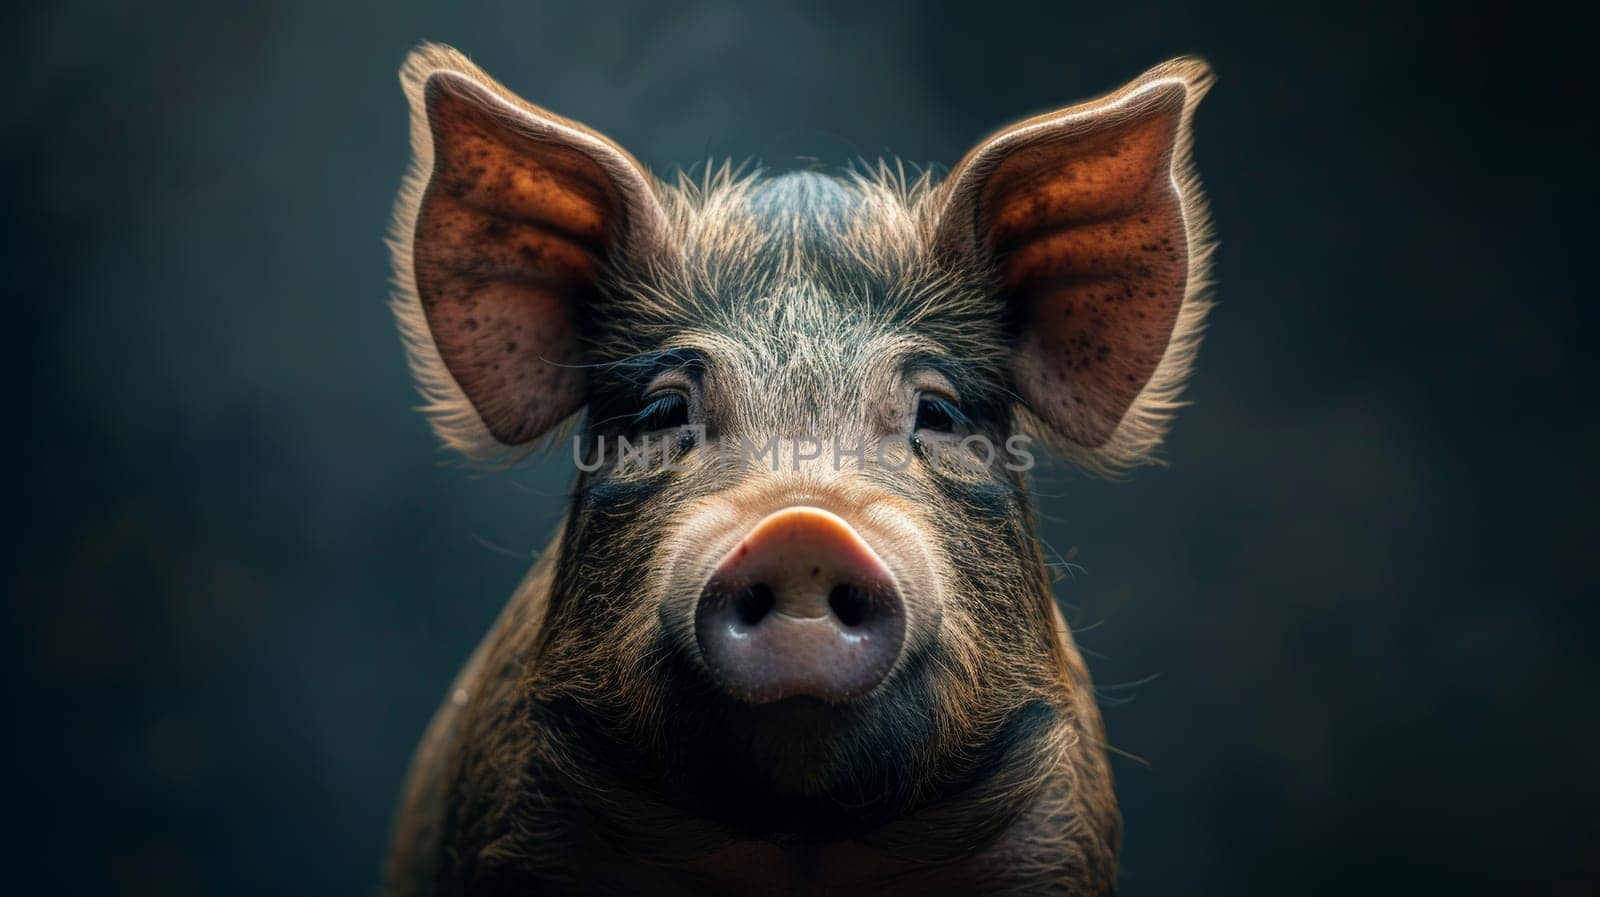 A close up of a pig with big ears and dark background, AI by starush